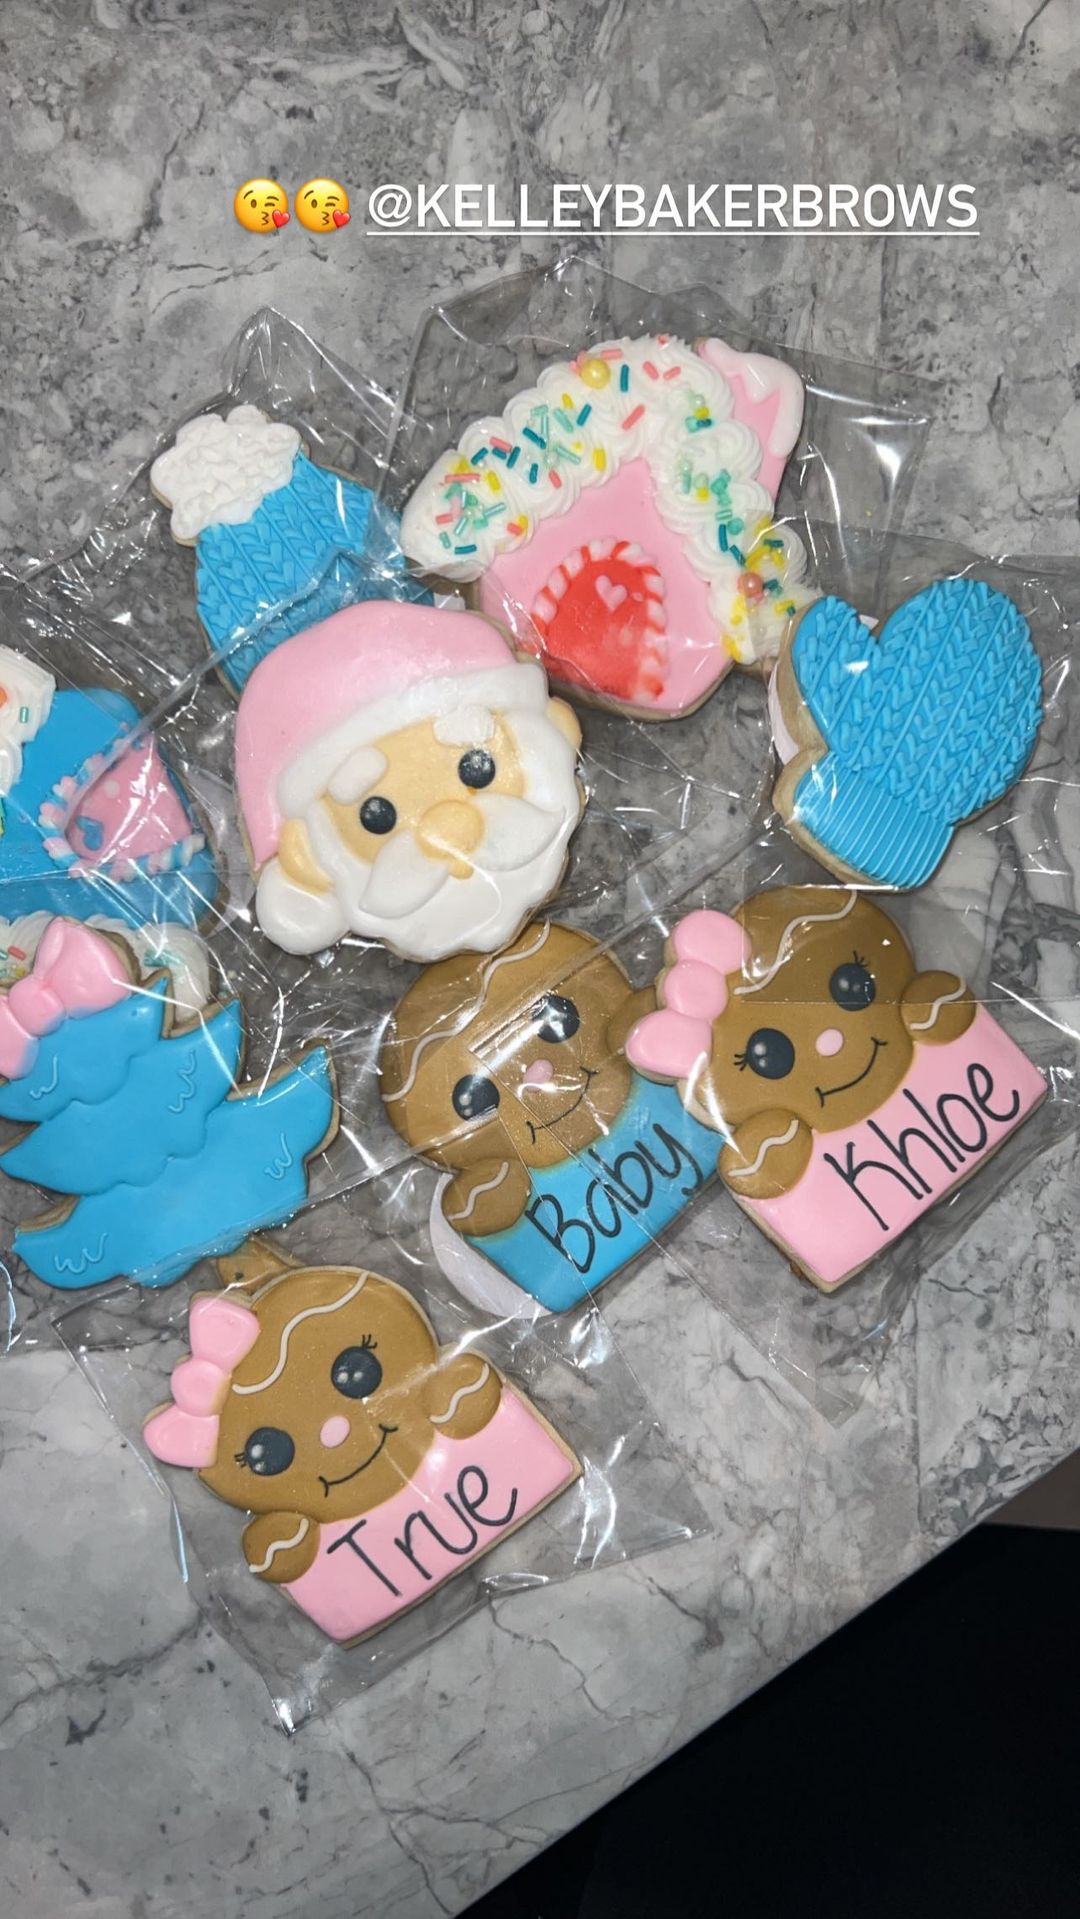 Khloe Kardashian teases her baby son’s name as she gives fans a glimpse of Christmas cookies for family